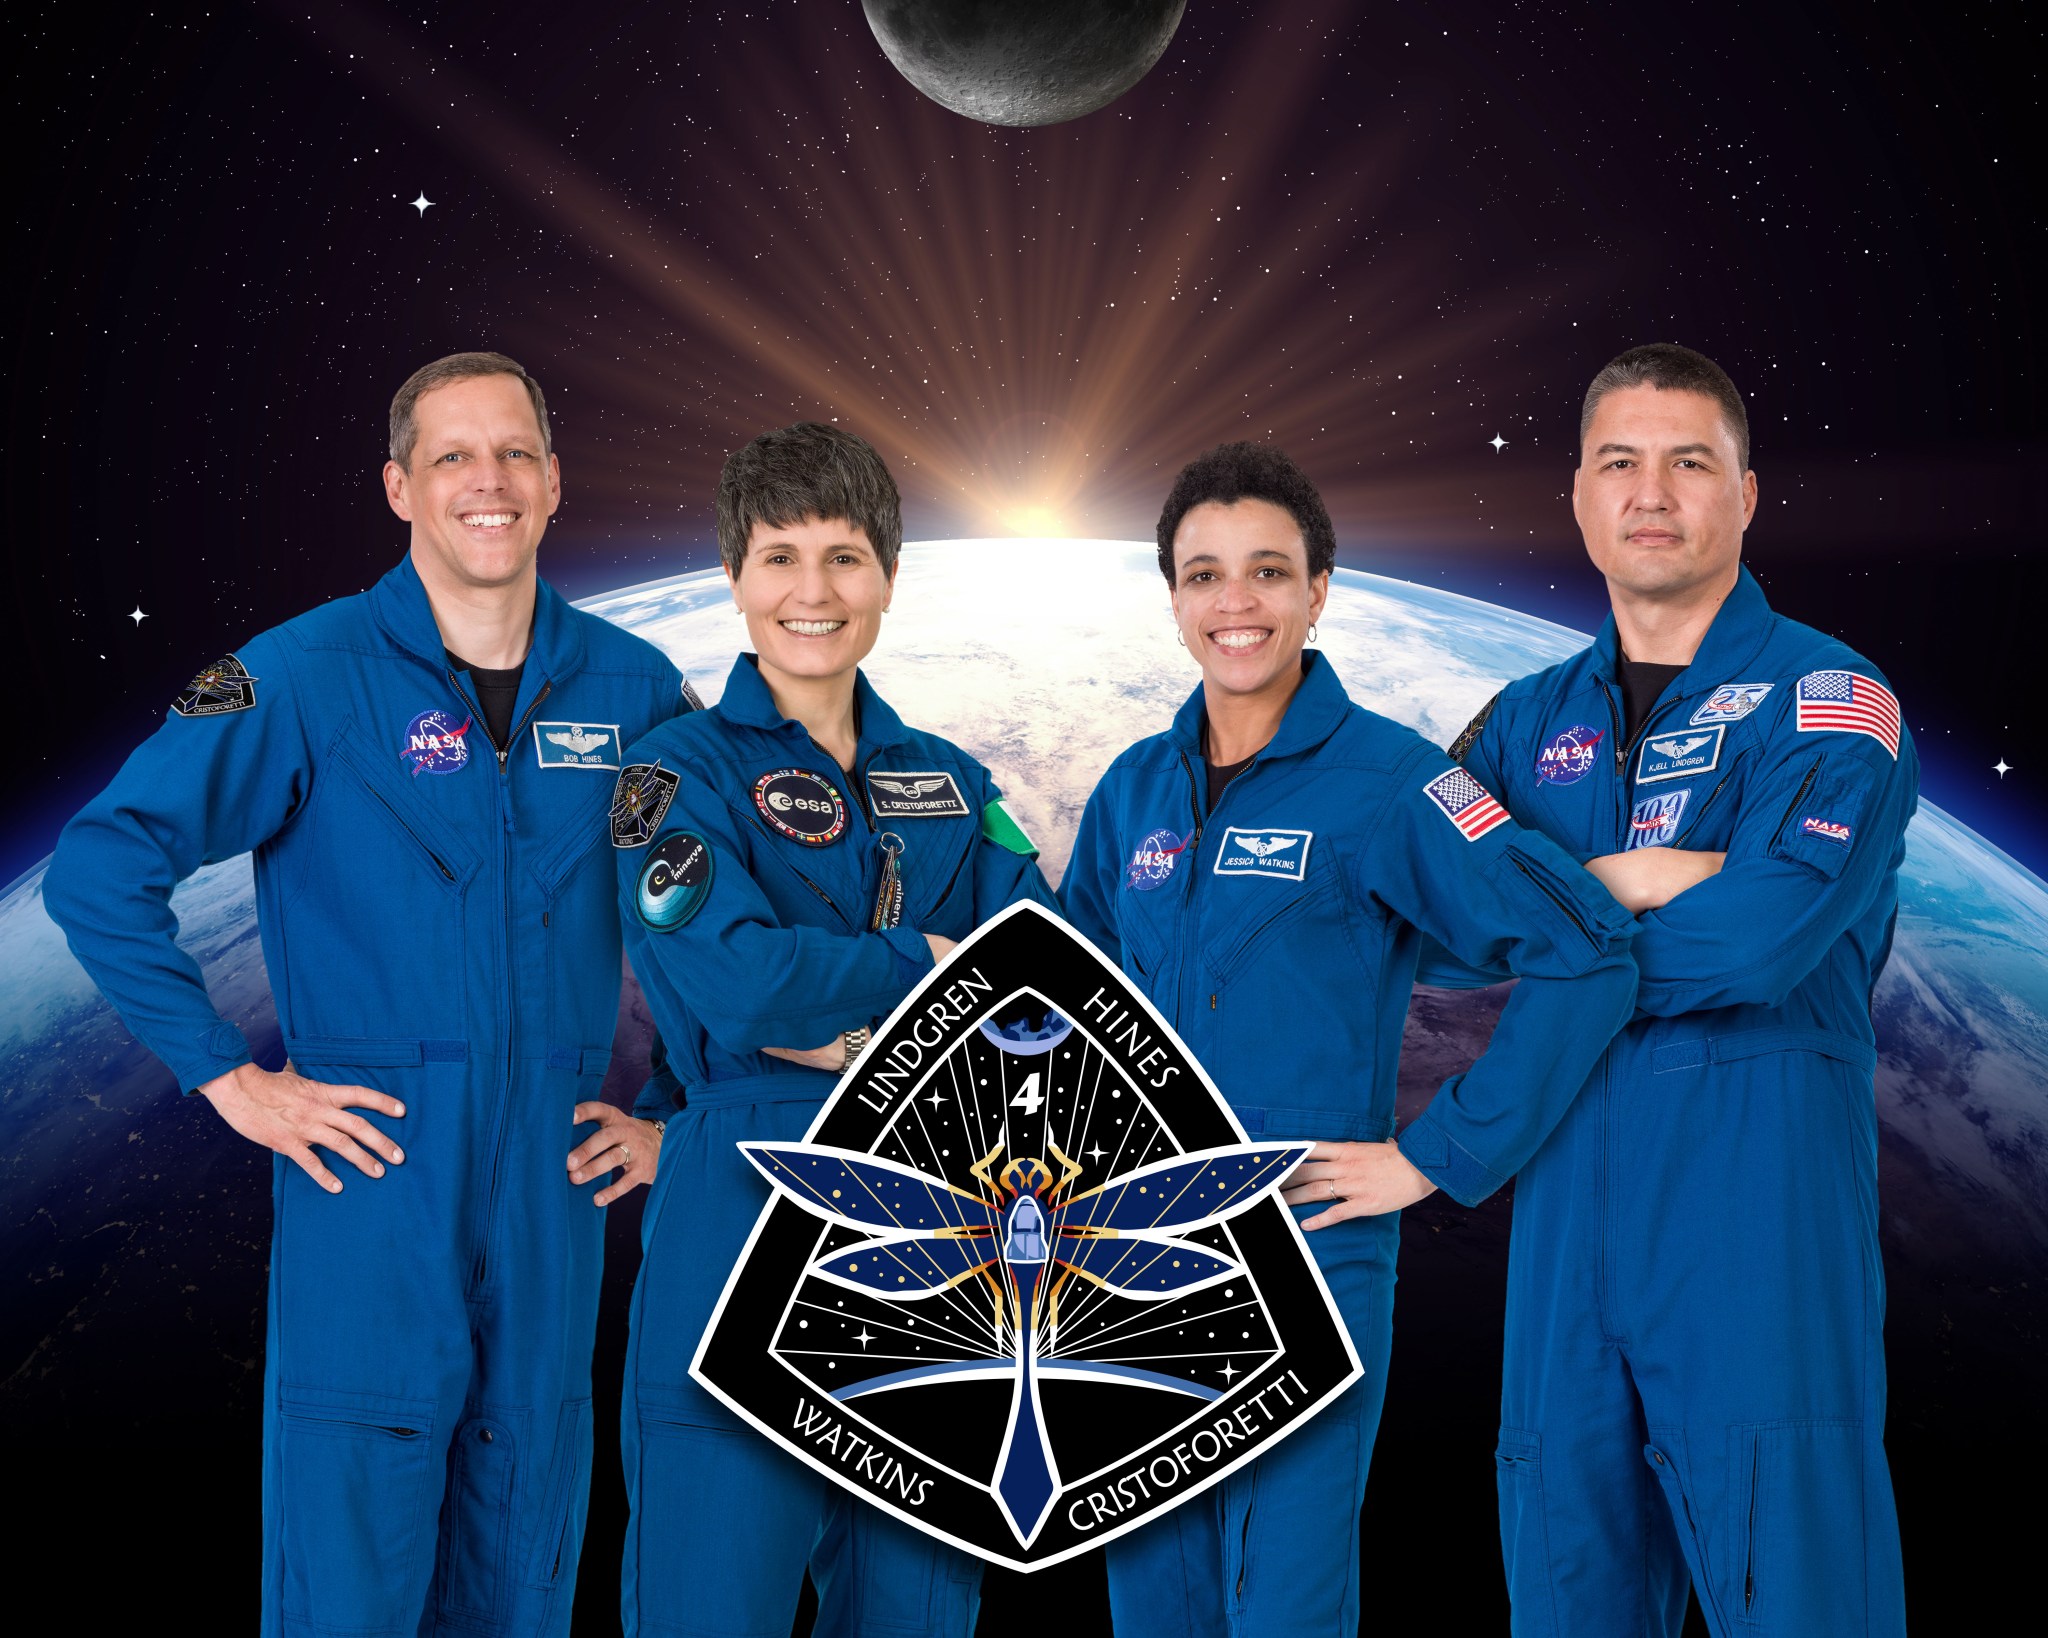 The official crew portrait of the SpaceX Crew-4 astronauts representing NASA's Commercial Crew Program. From left are, Pilot Robert Hines, Mission Specialists Samantha Cristoforetti and Jessica Watkins, and Commander Kjell Lindgren. 